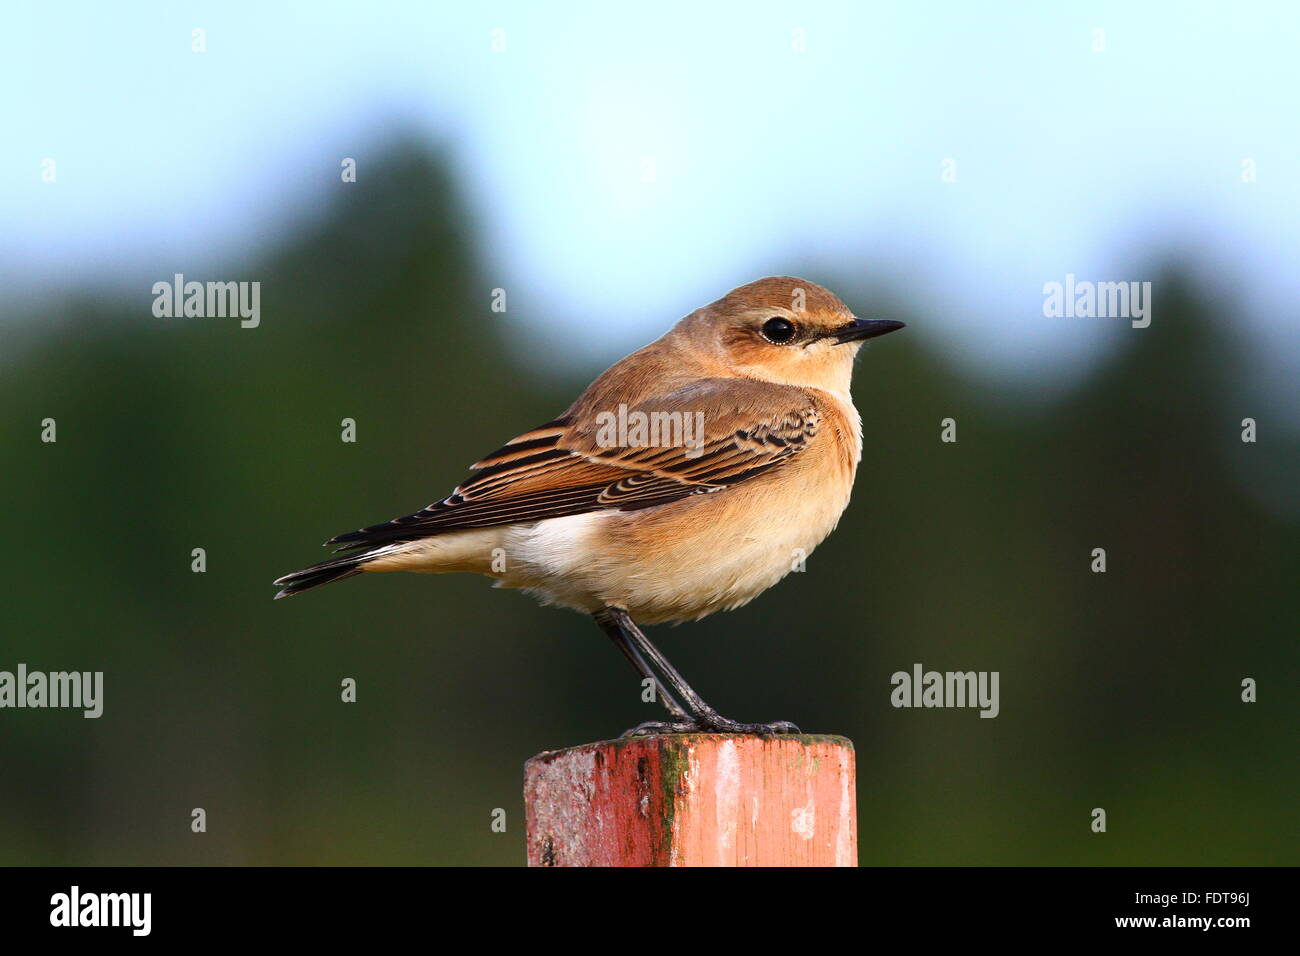 Northern wheatear, Oenanthe oenanthe standing on pole Stock Photo